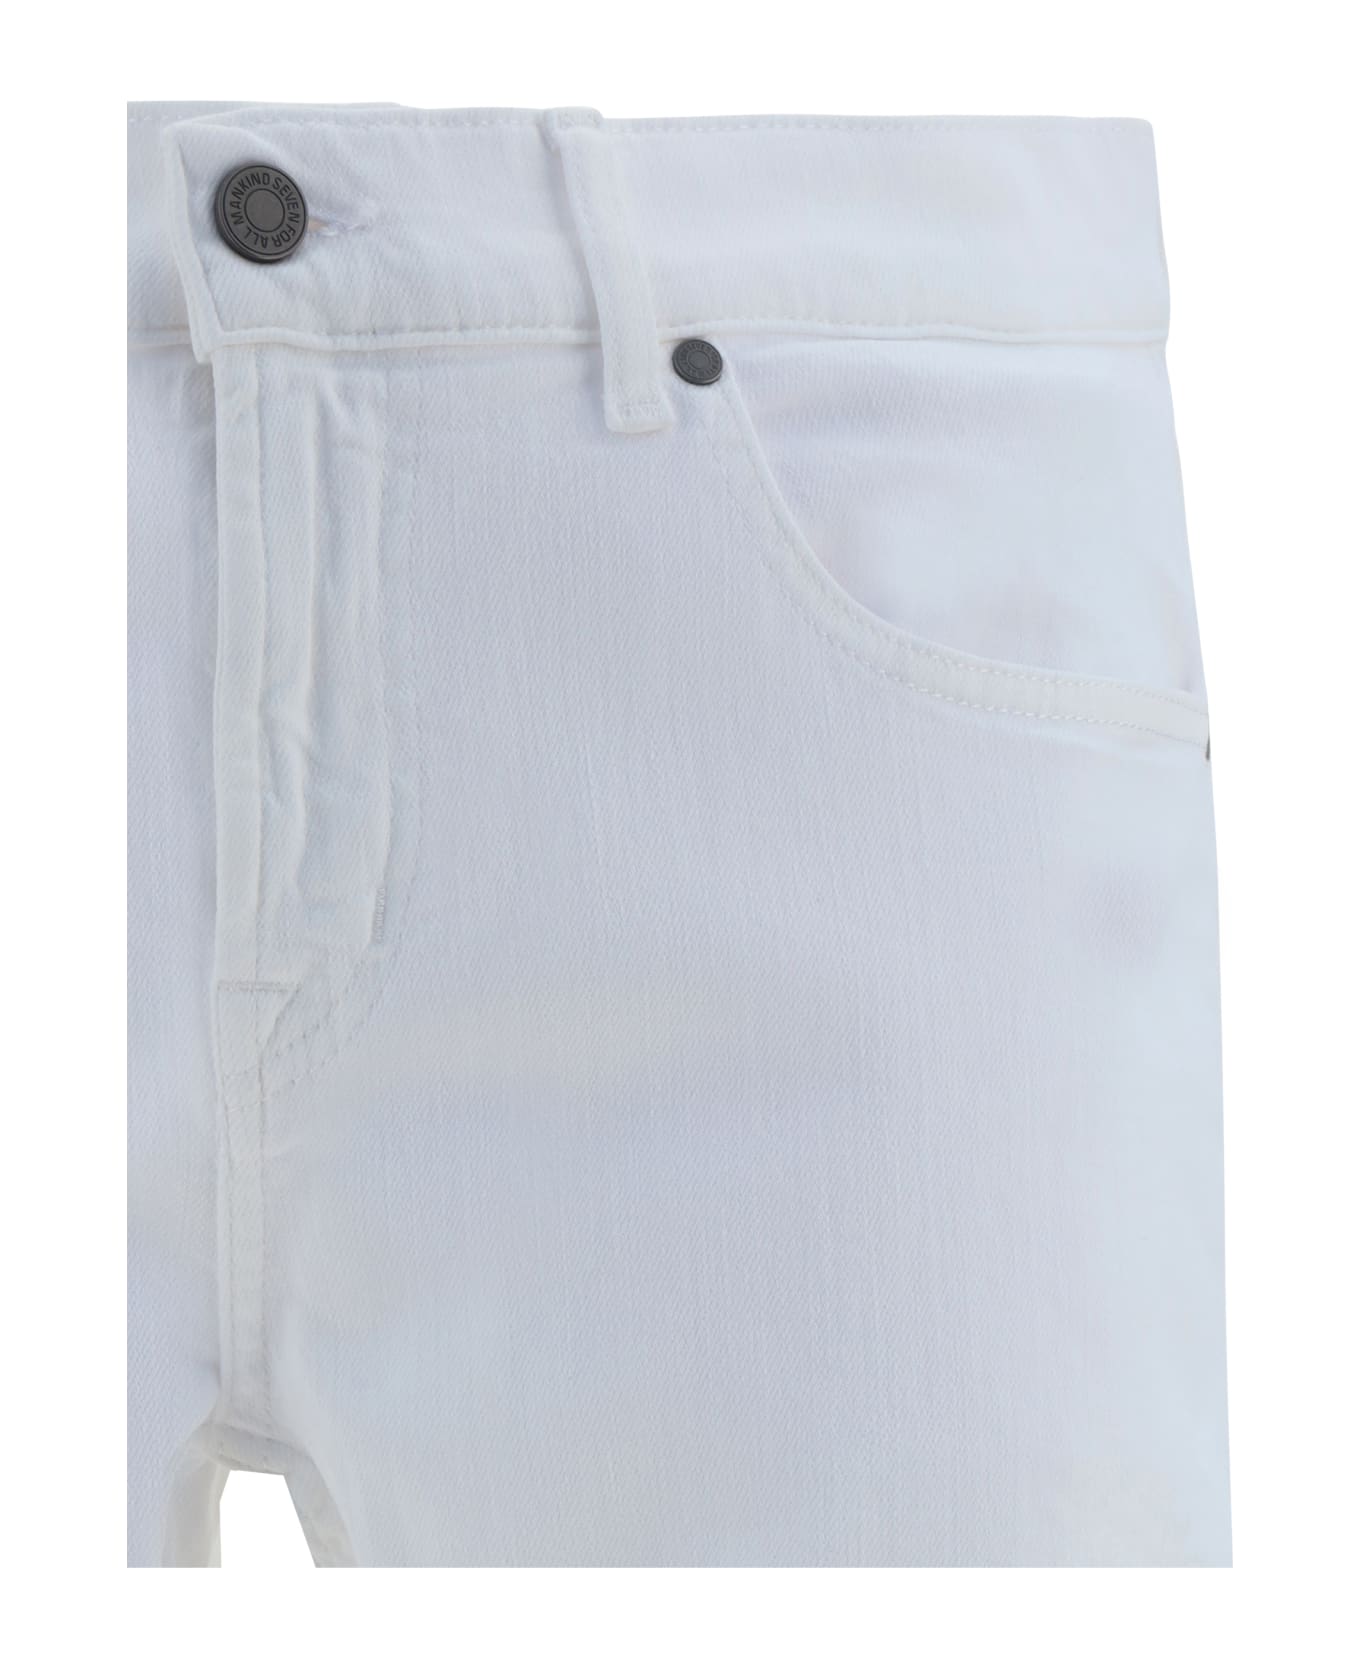 7 For All Mankind Luxe Pants - White デニム